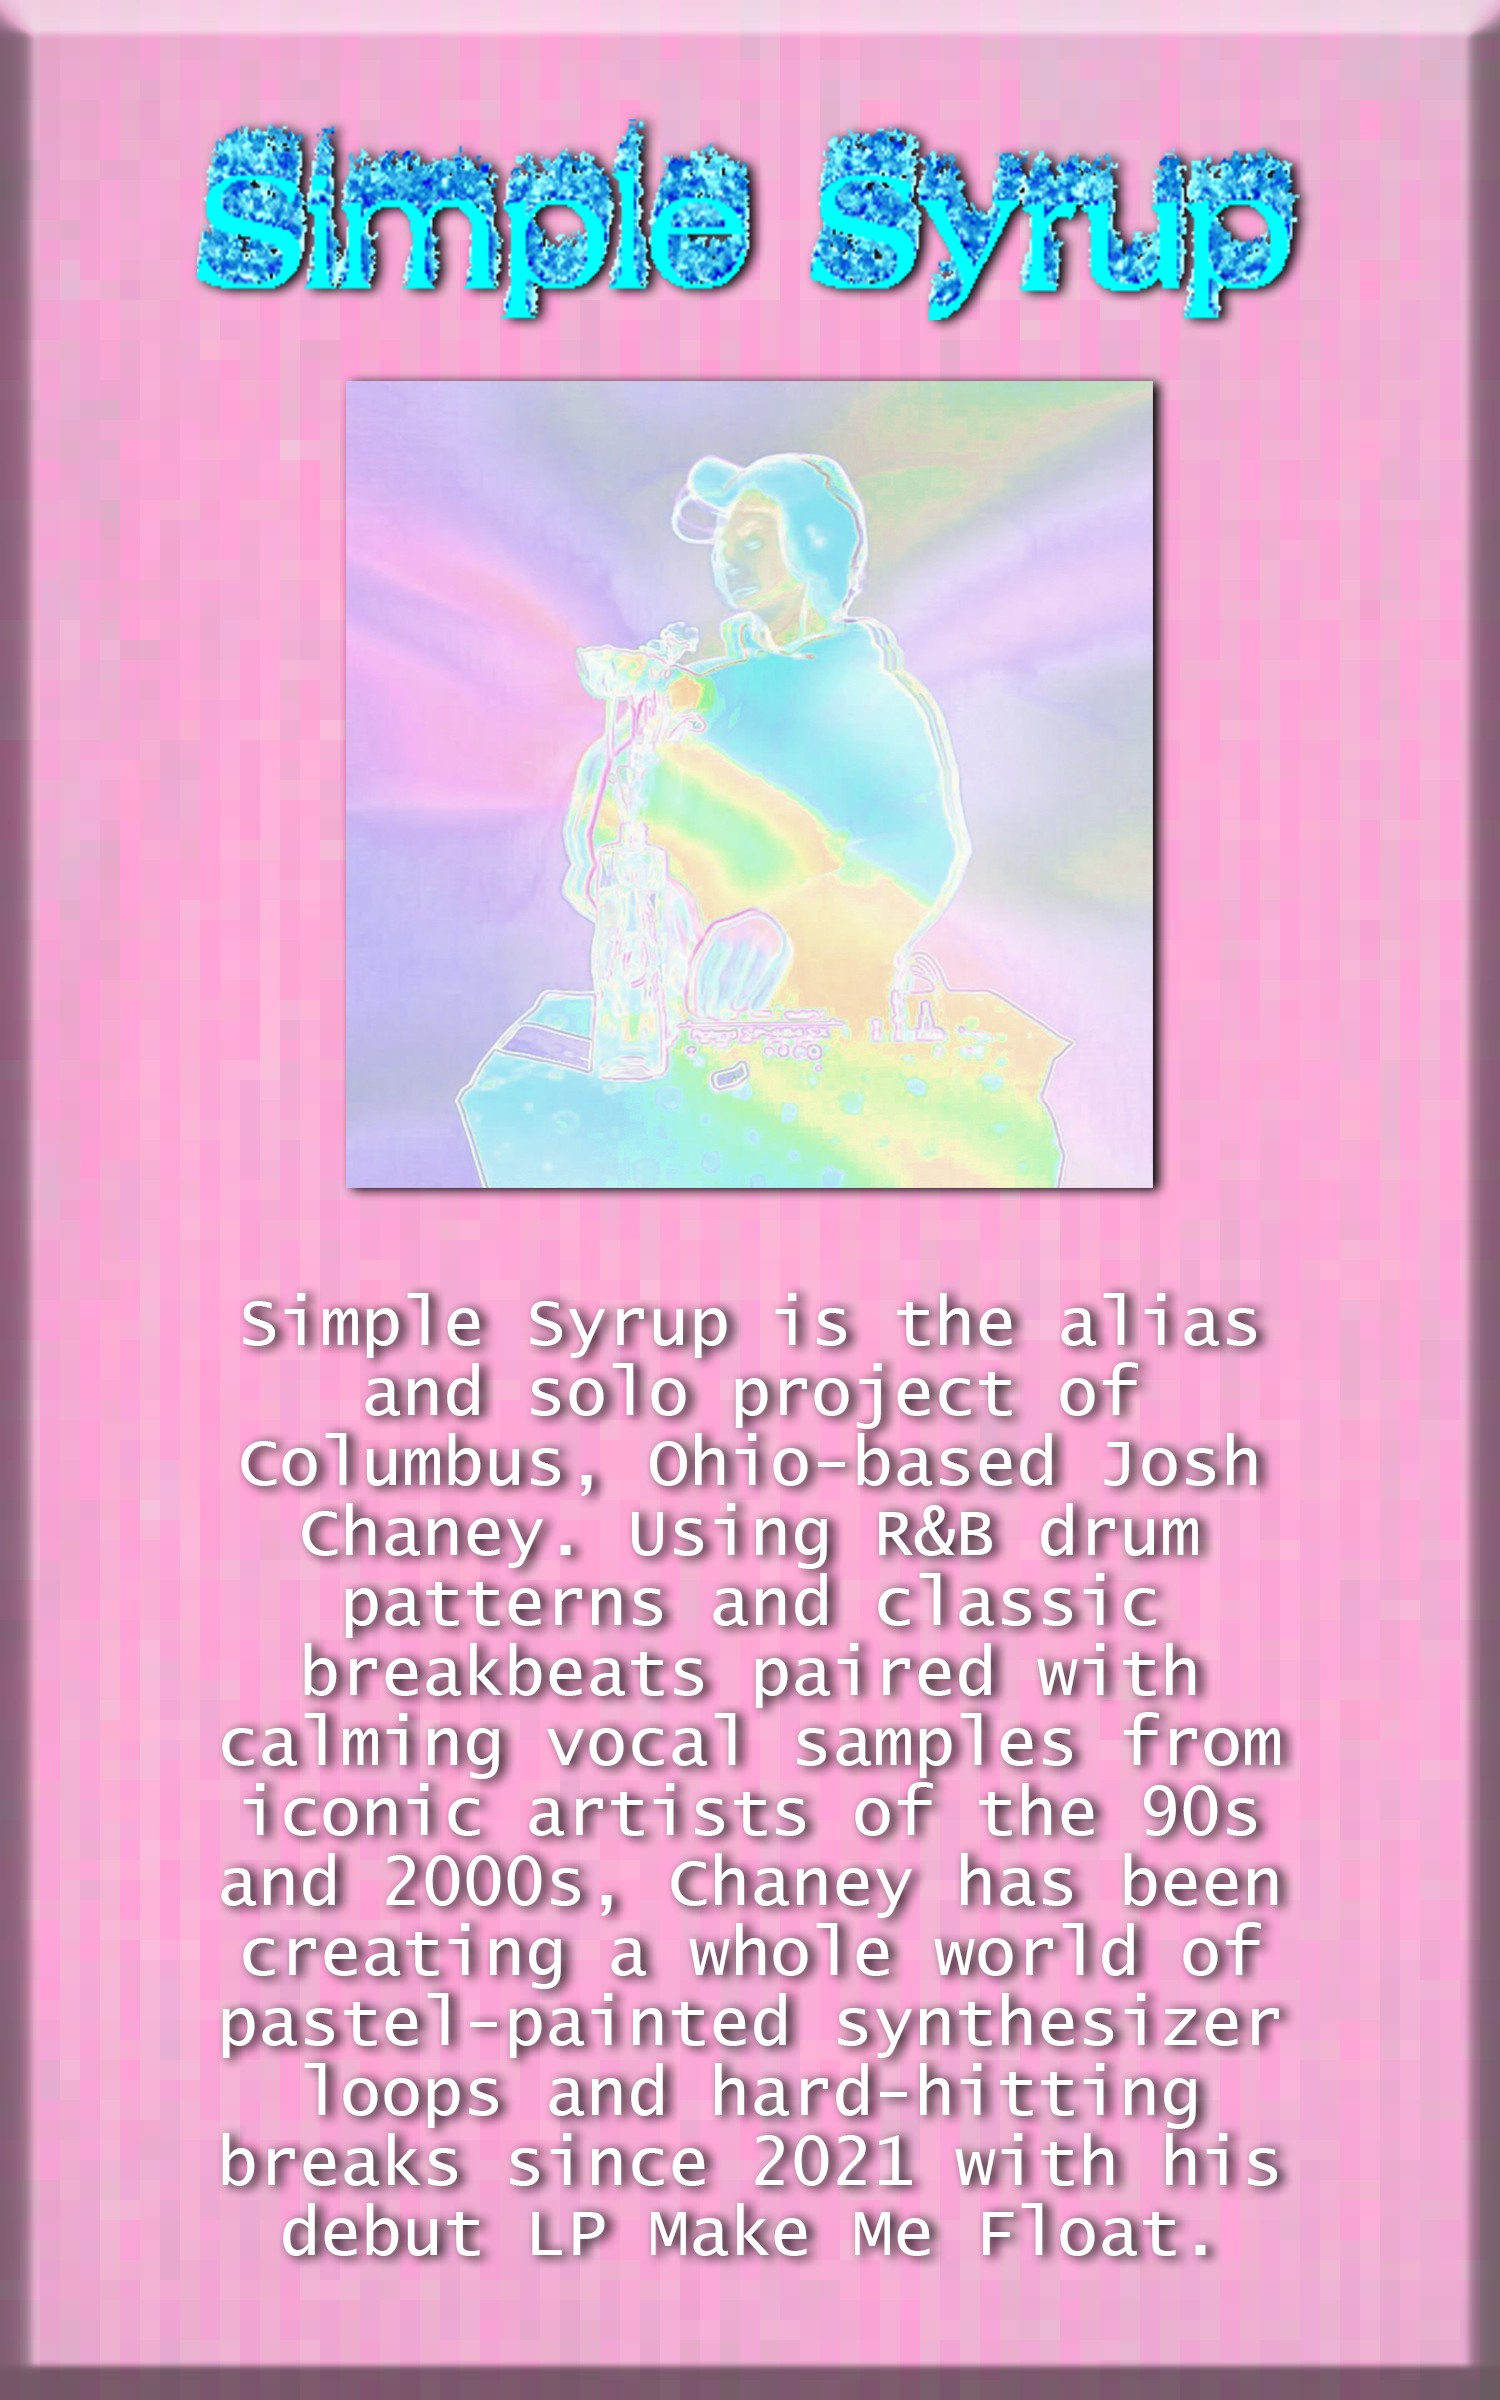 A picture of Simple Syrup playing live for an online show with light-colored pastel glitch visuals covering him.